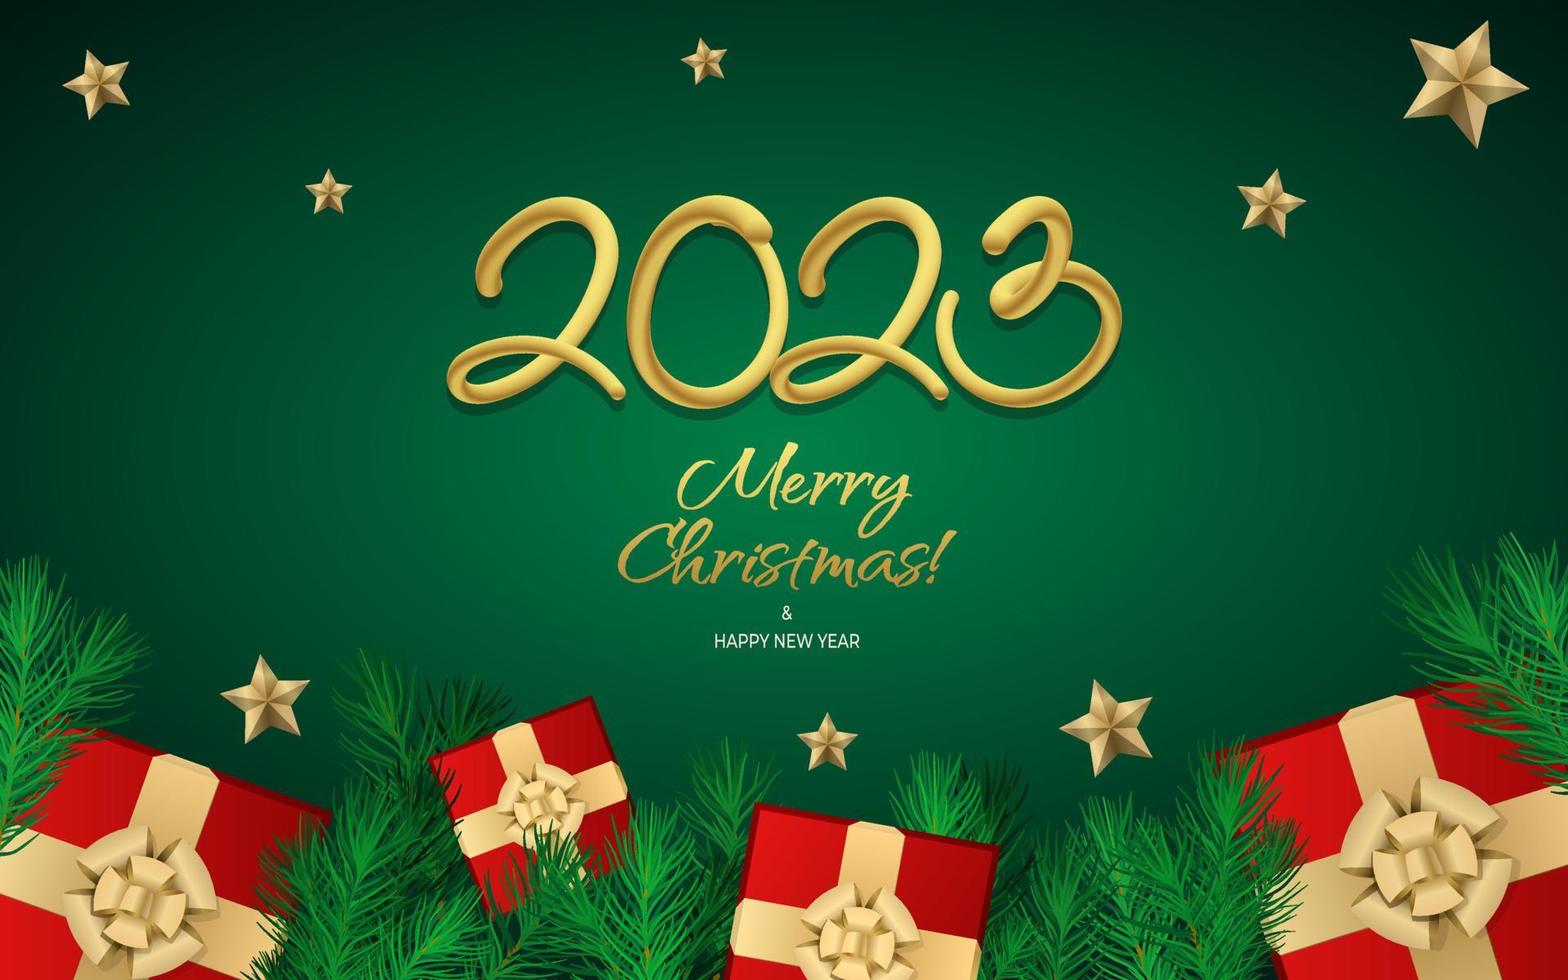 Happy new year 2023 greeting vector. Merry Christmas design greeting text with colorful Christmas decor elements gift, fir tree branch, stars on a green background with luxury gold. Vector Art